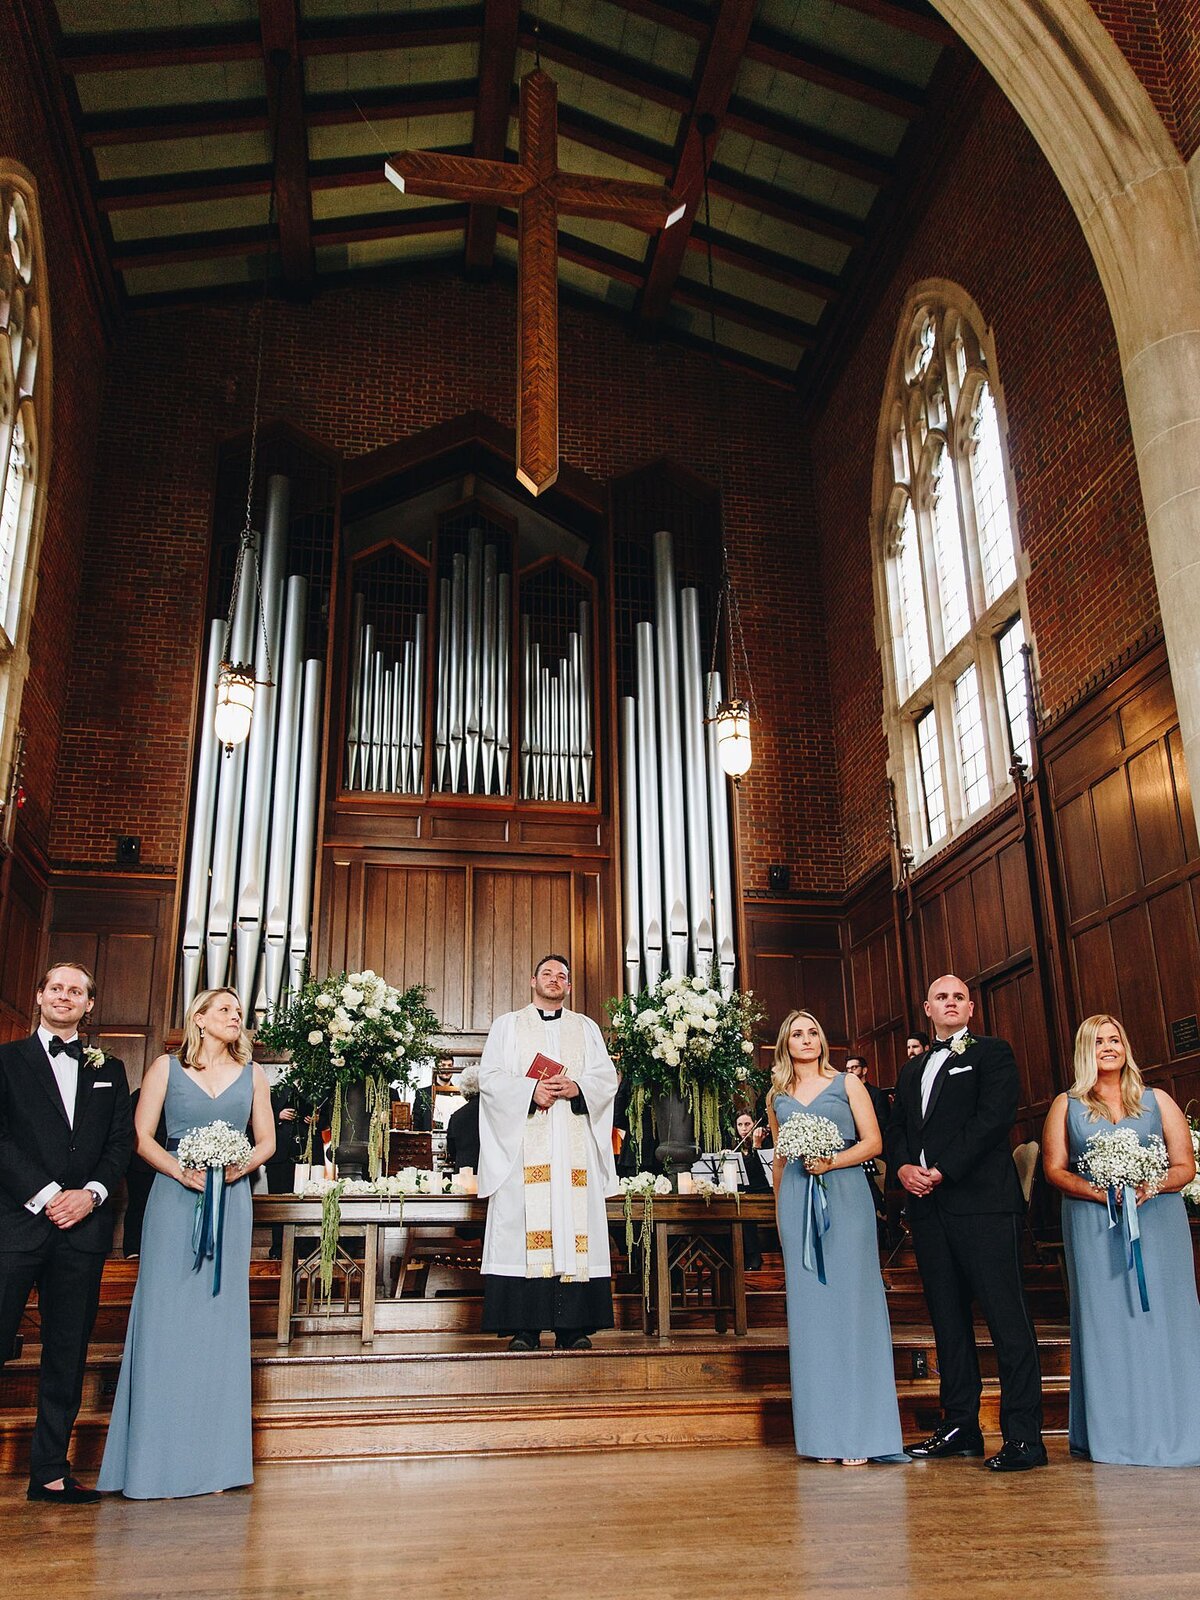 The altar with a floor length pipe organ  at Scarritt Bennett's Wightman Chapel. The bridal party wearing black tuxedos, dusty blue dresses and white bouquets stand waiting for the couple.